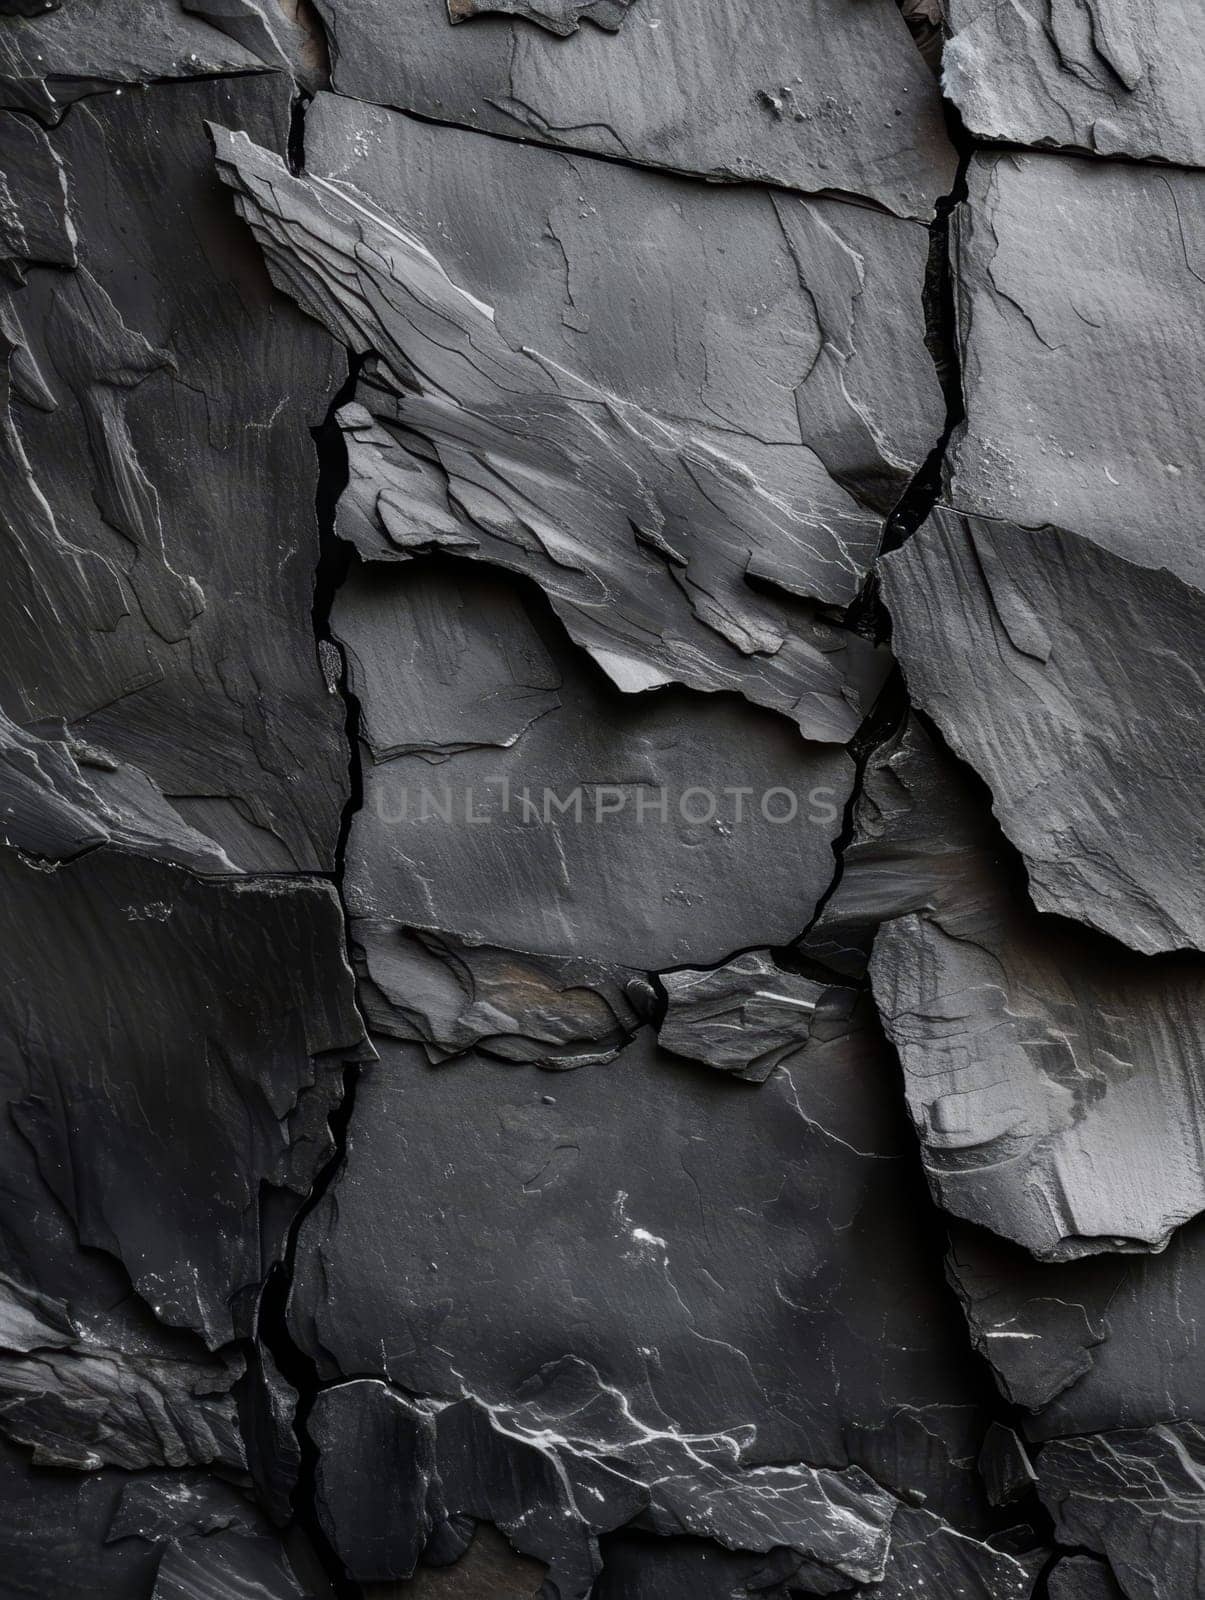 Close-up view of a dark, textured rock surface with jagged and rough texture